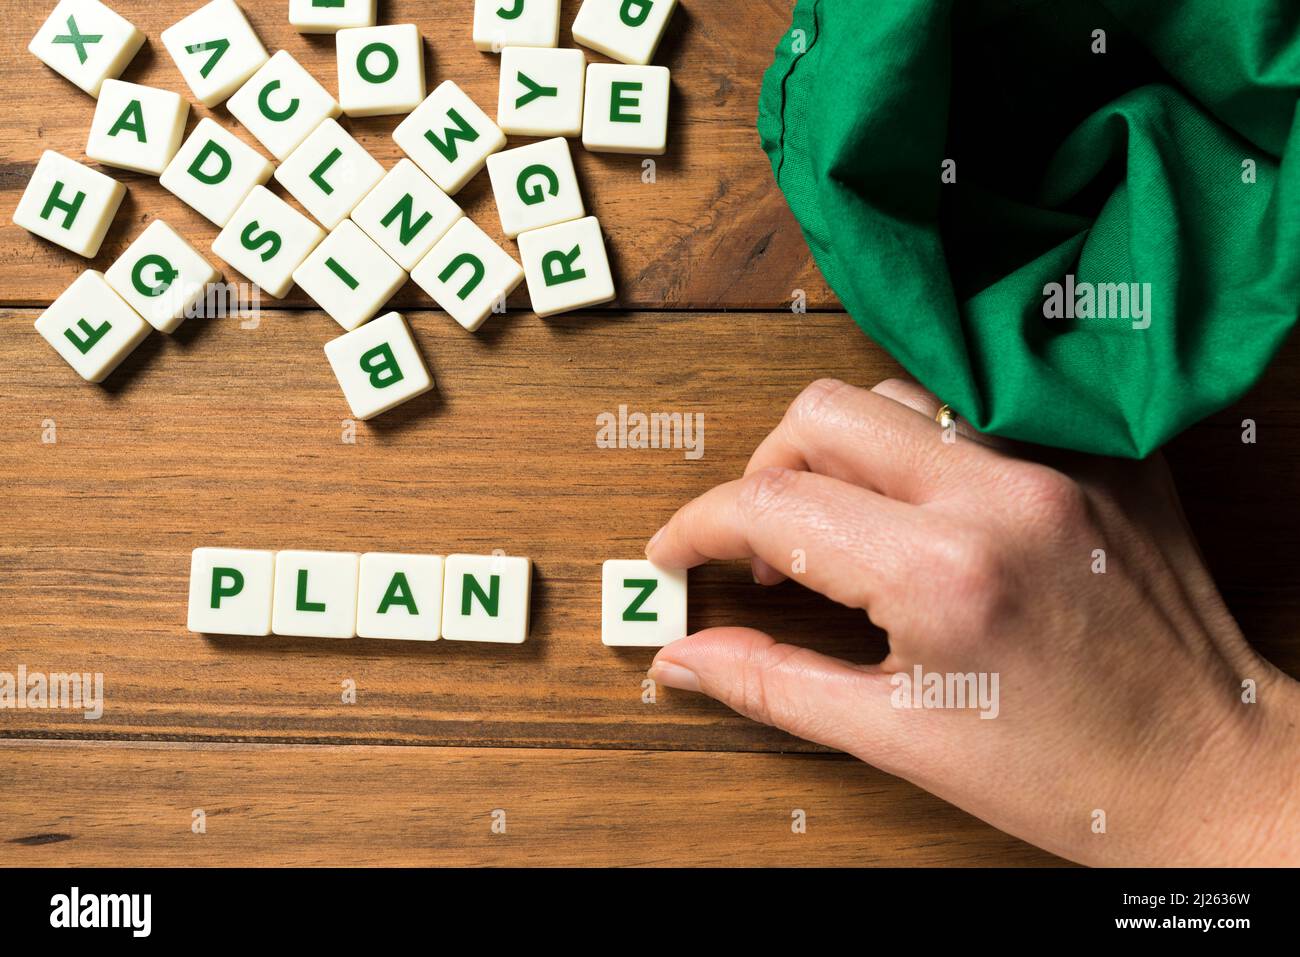 A hand placing a piece with the letter Z next to the word PLAN. An empty green bag and other pieces with letters appear displaced. Concept of planning Stock Photo